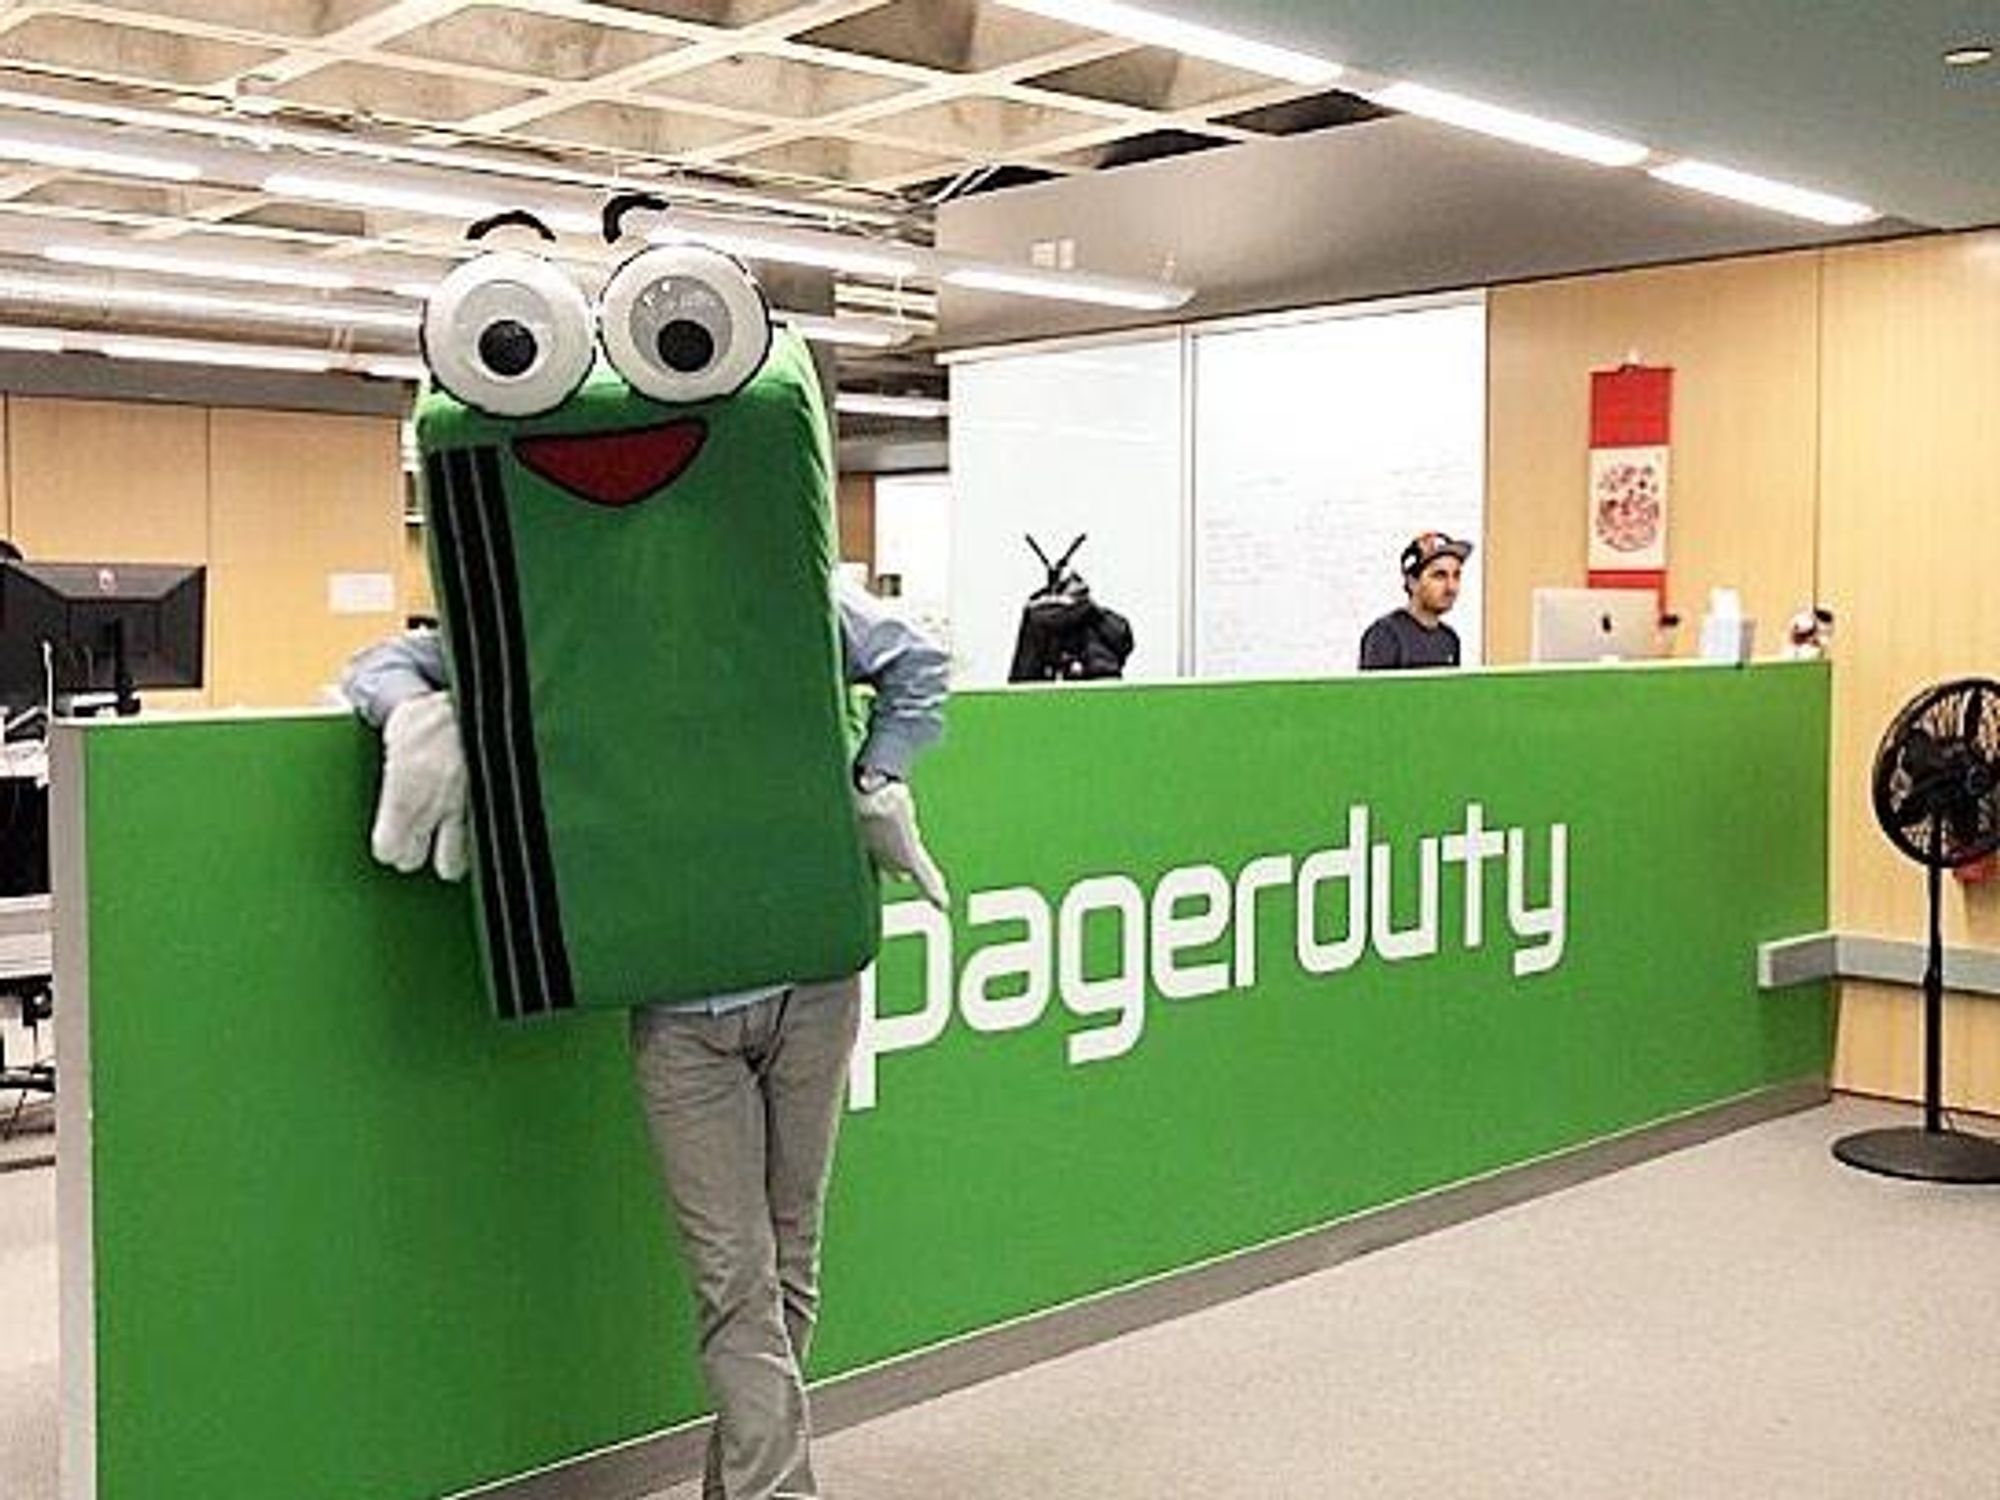 PagerDuty is a digital operations management platform that helps companies manage their digital operations